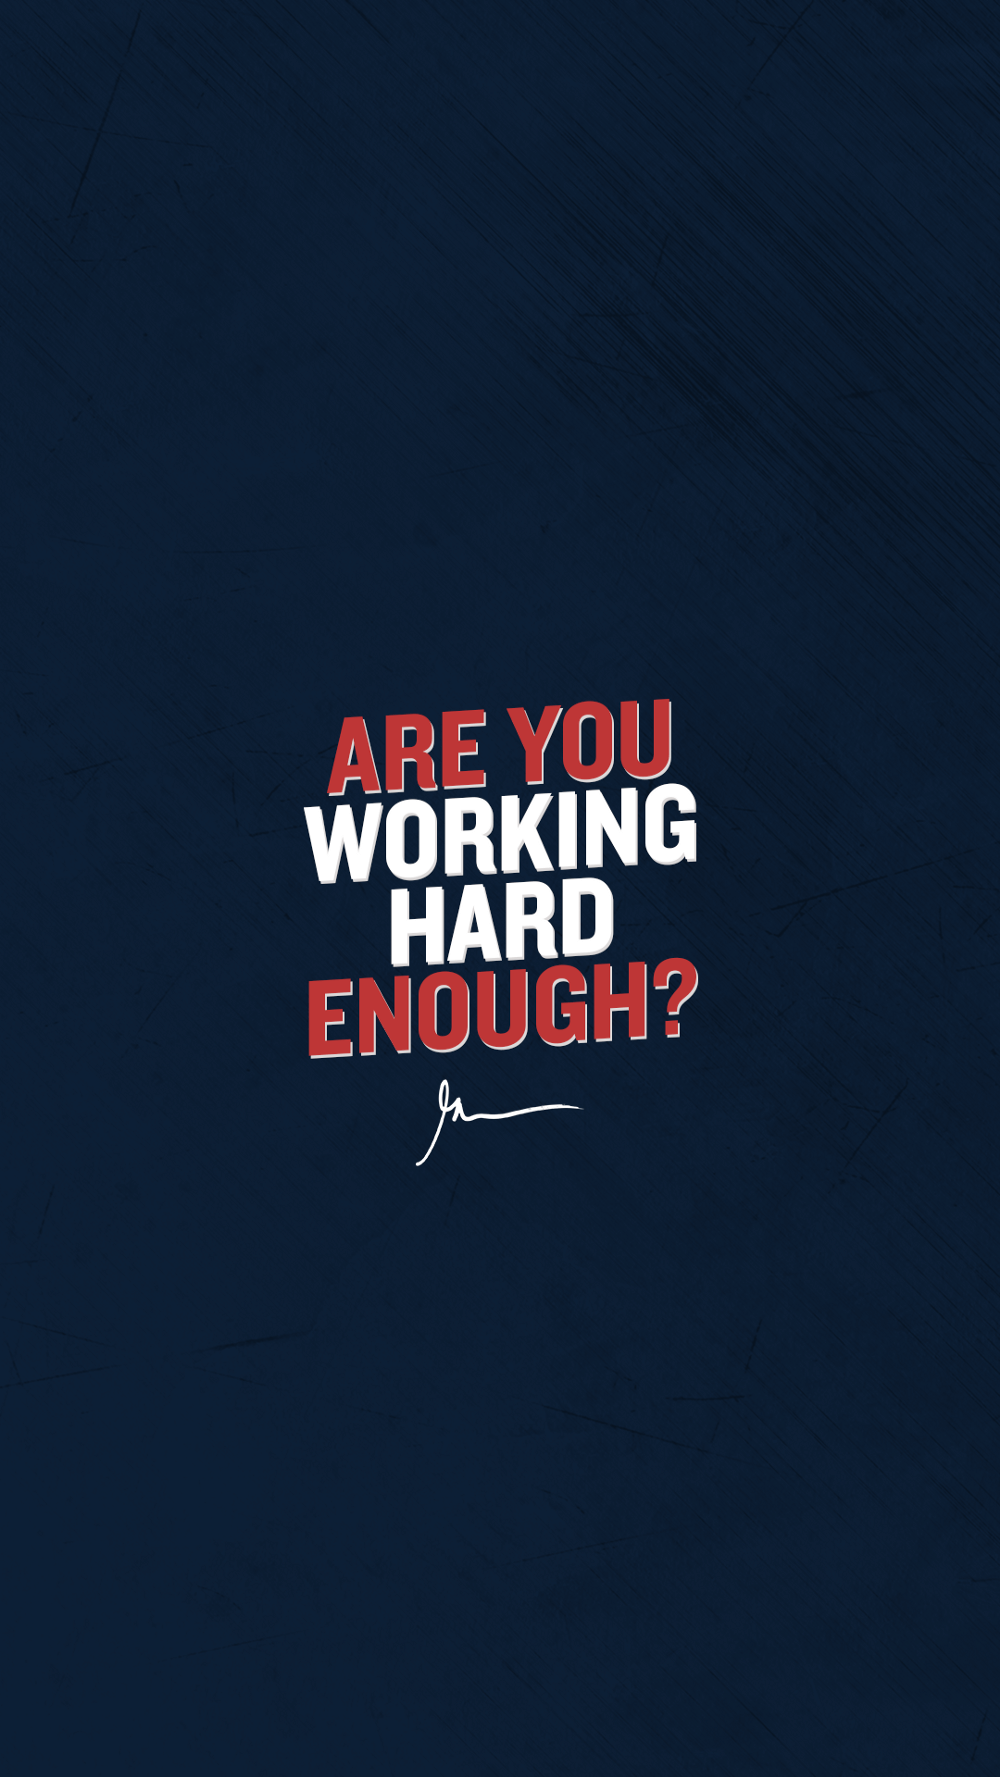 Are you working hard enough?